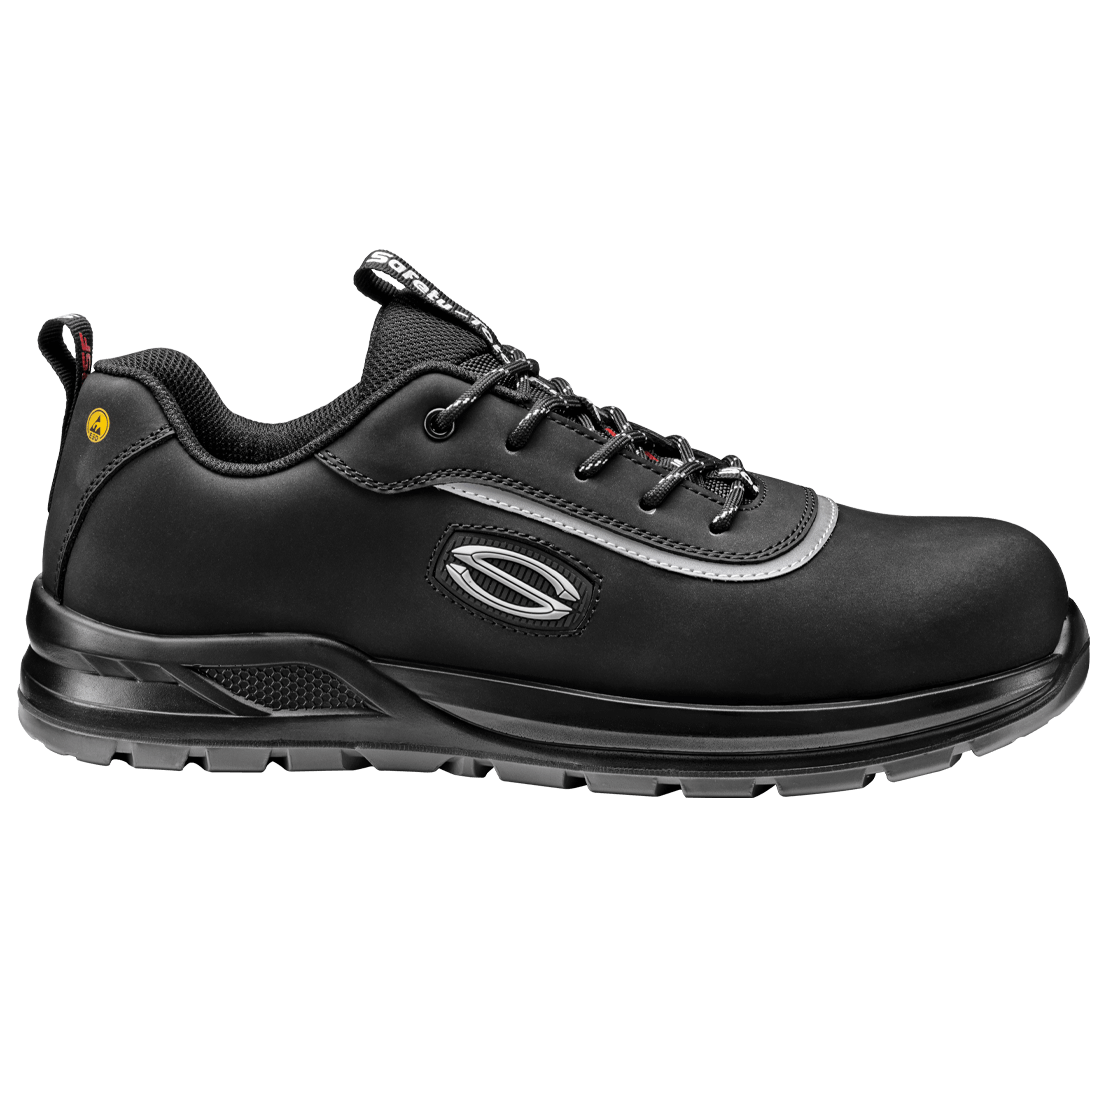 NEW OVERCAP BSF REX Safety SHOE System | Sir